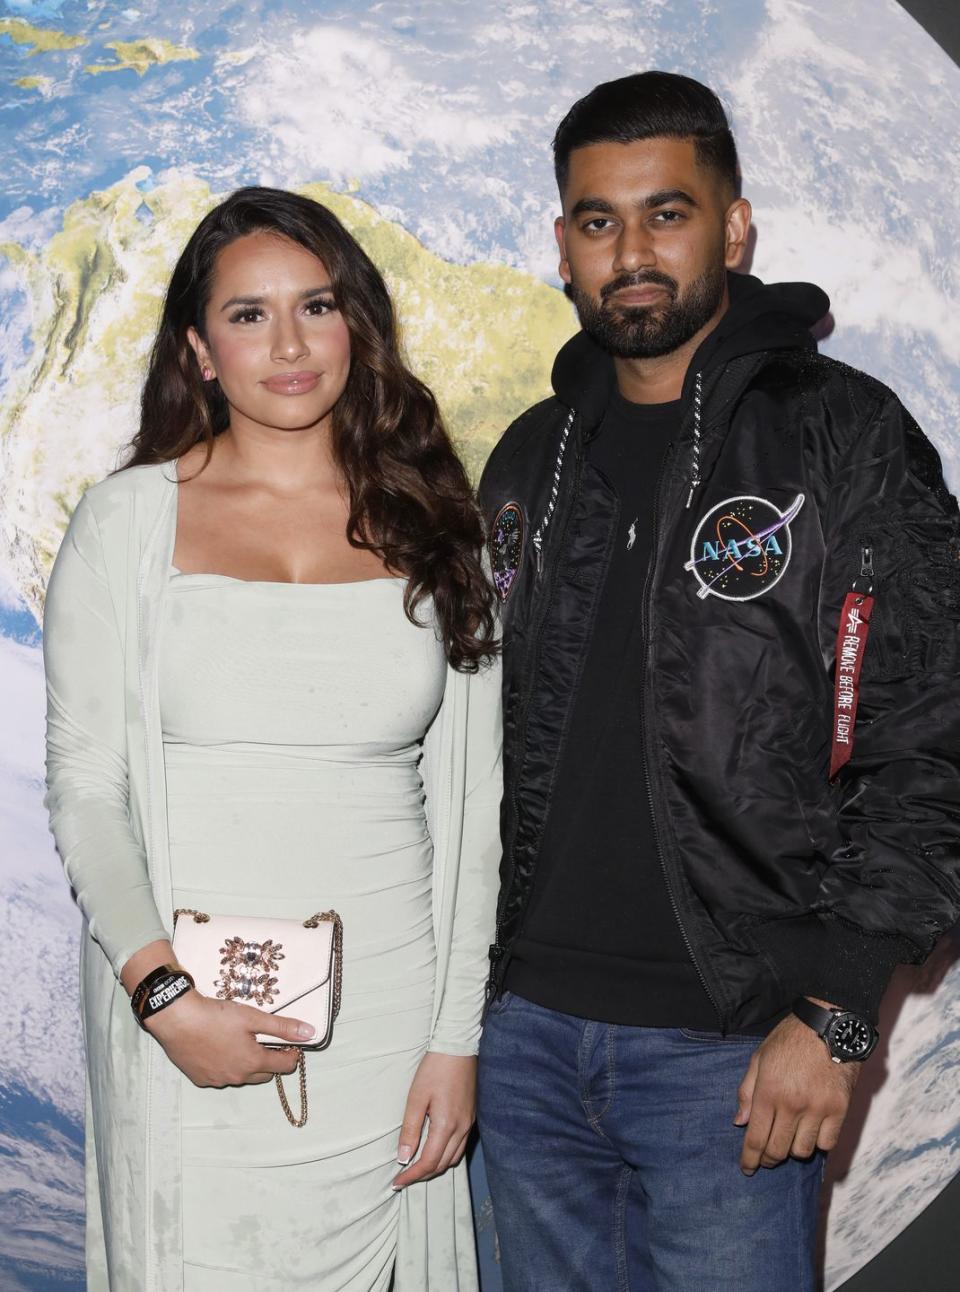 london, england march 29 harpreet kaur and akshay thakrar attend the bbc earth experienceat daikin centre on march 29, 2023 in london, england photo by tristan fewingsgetty images for bbc earth launch